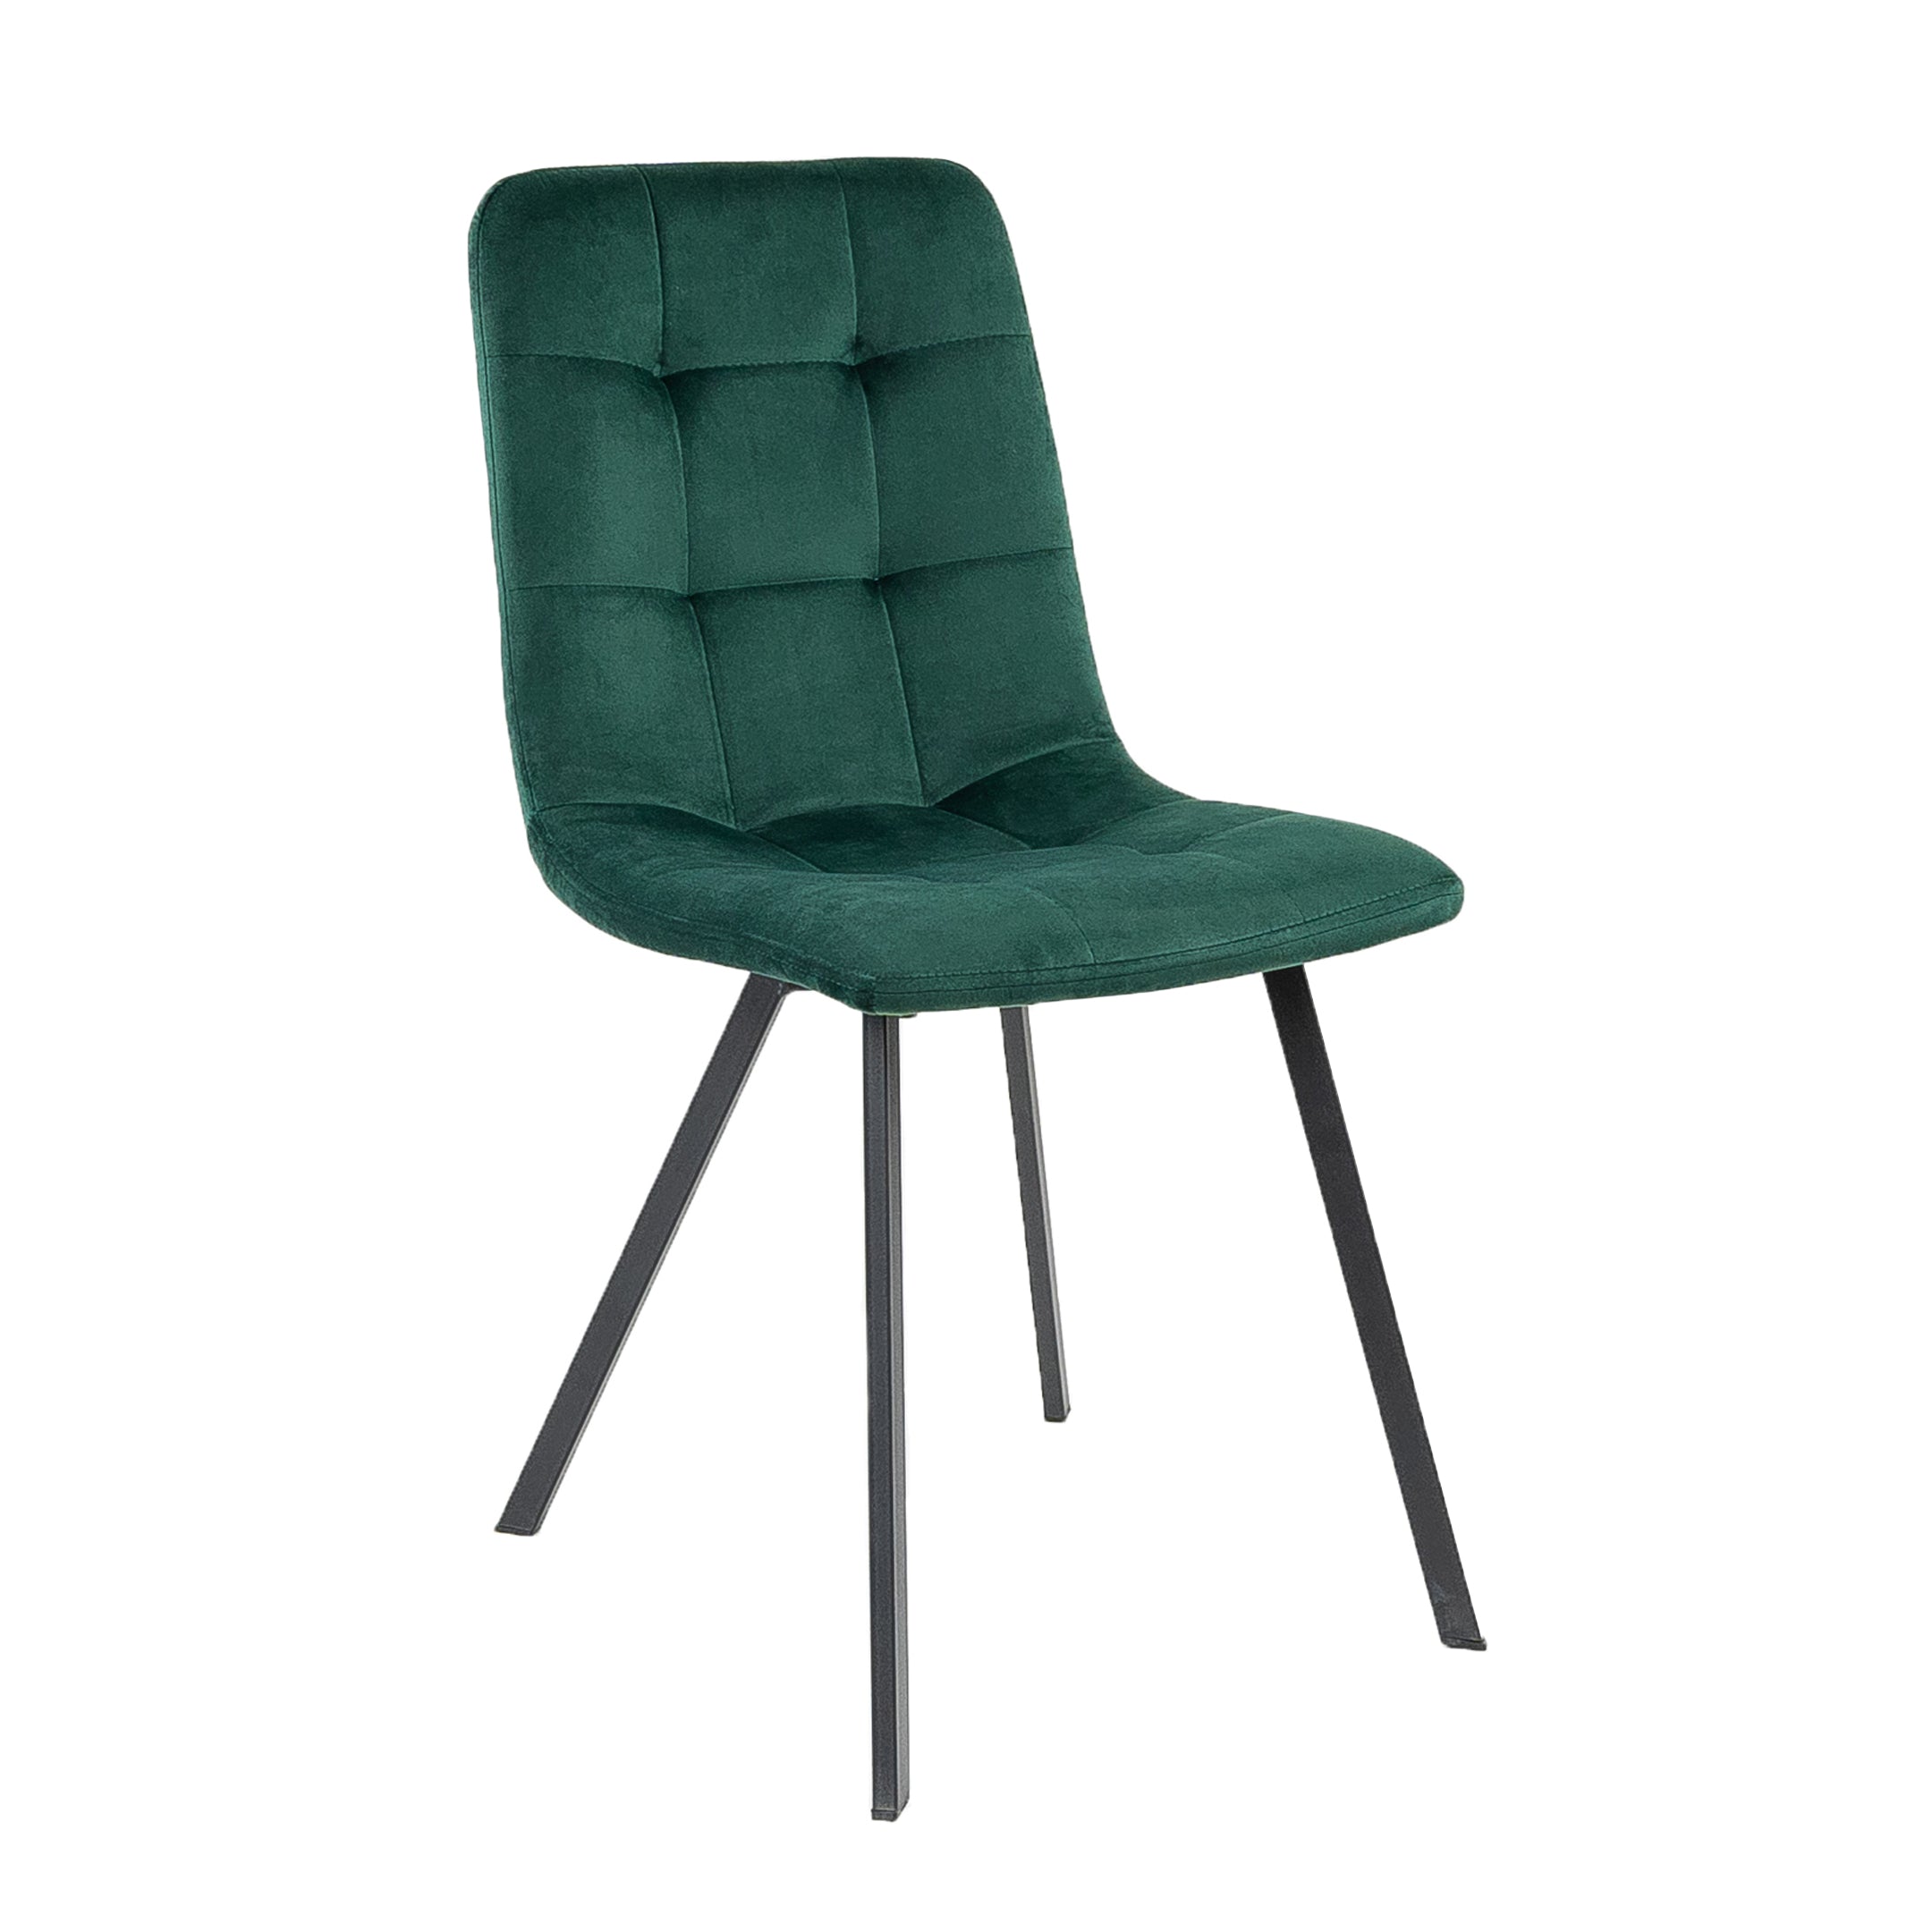 Kick dining room chair Monz